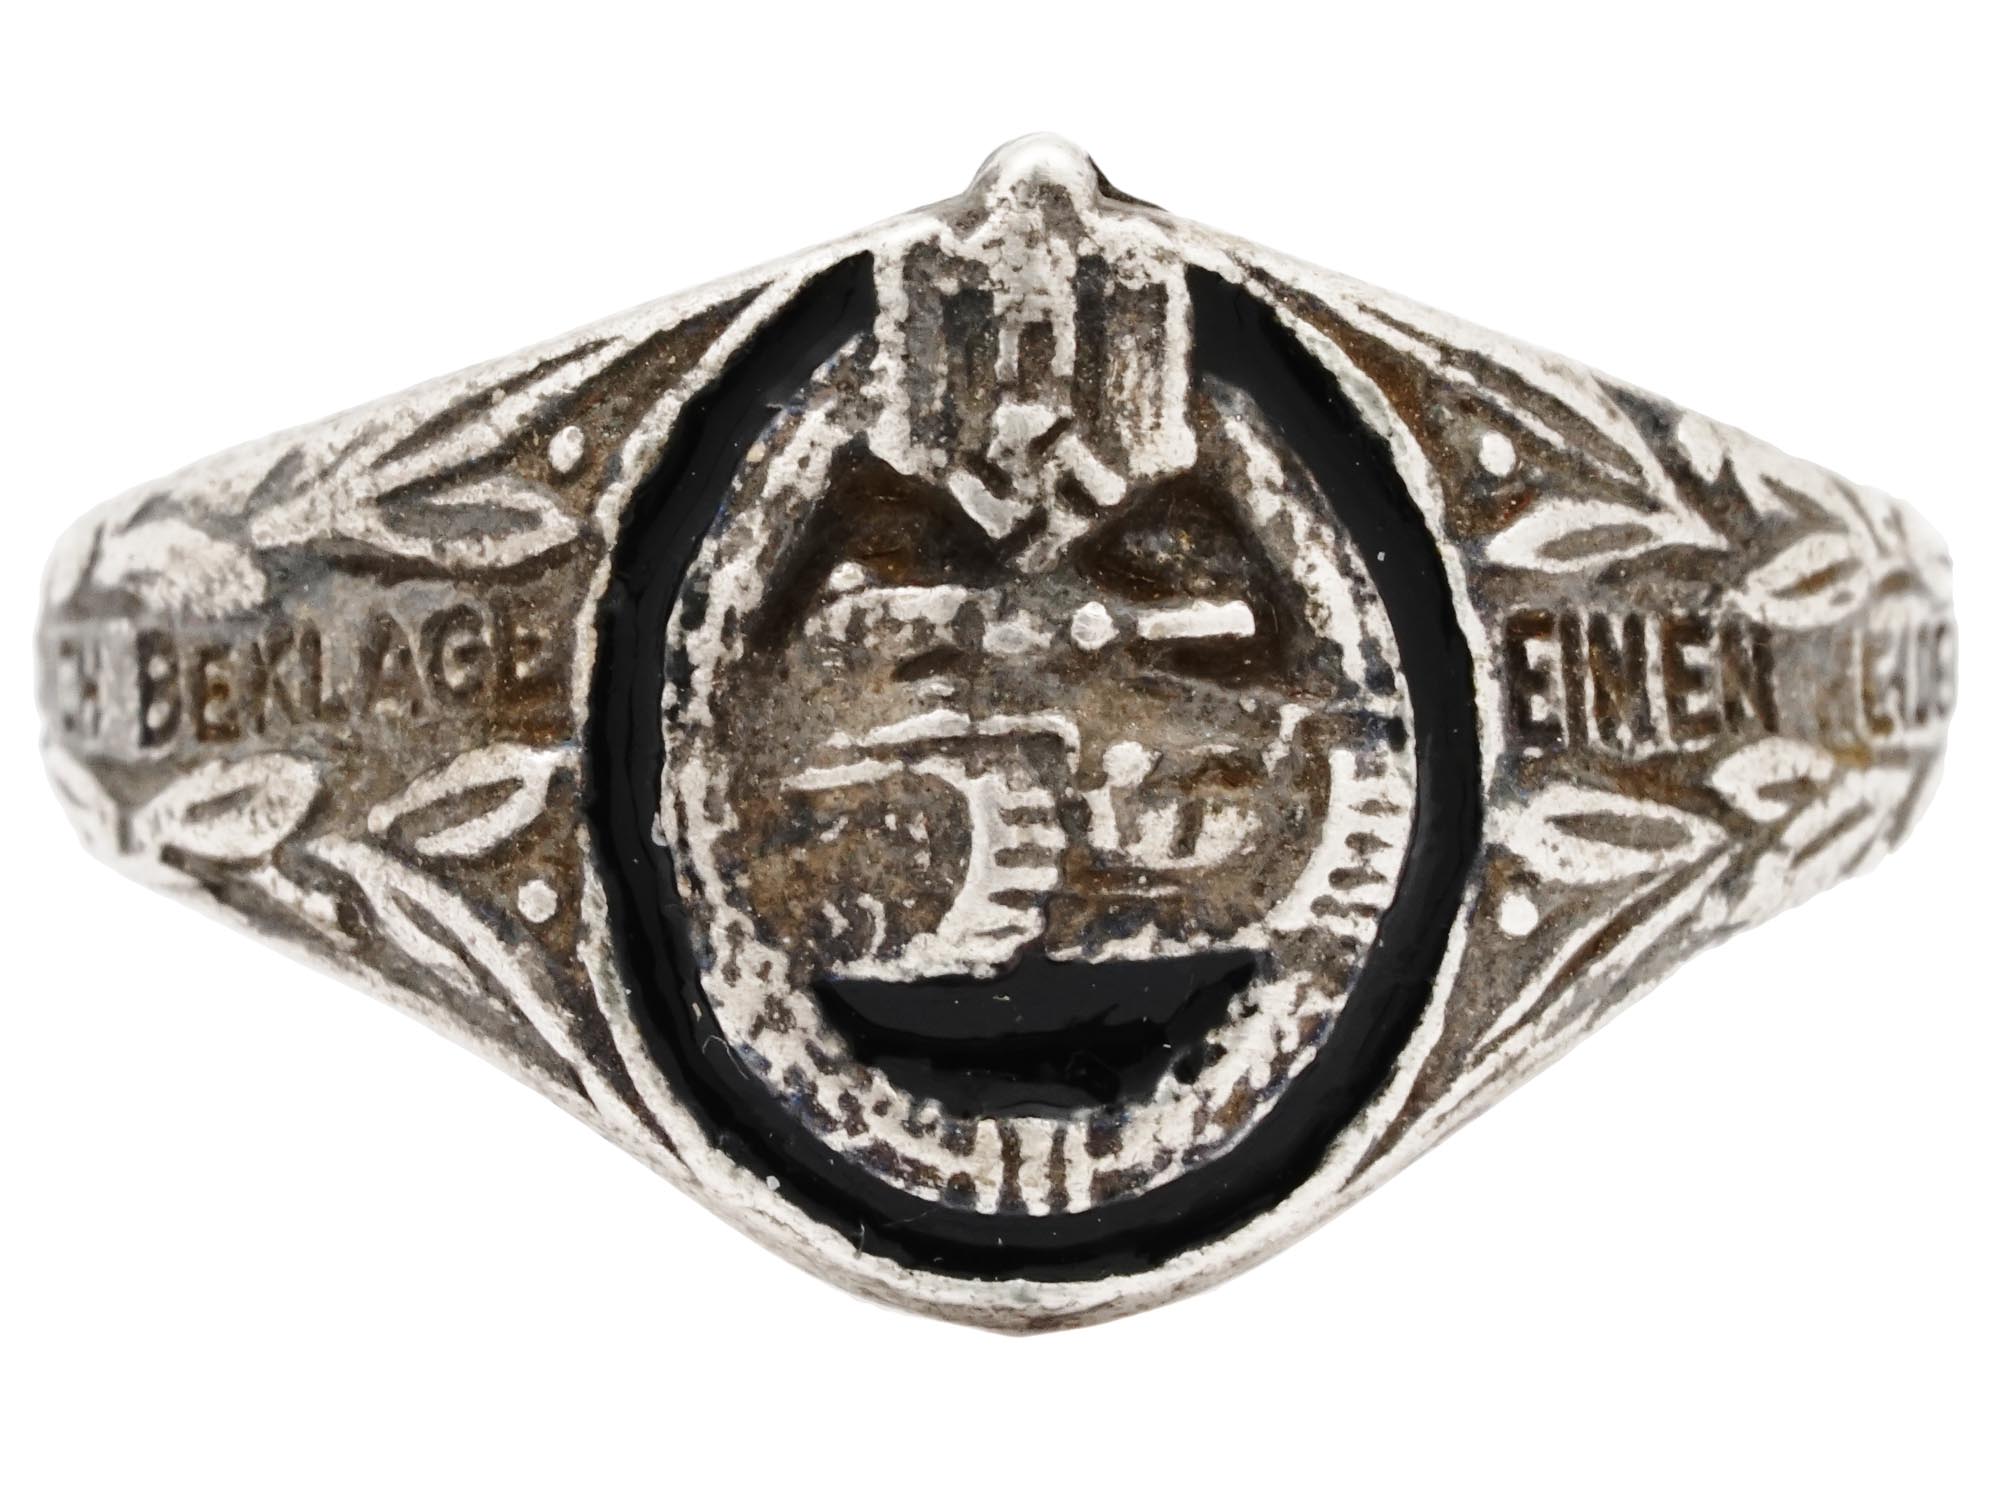 WWII GERMAN WAFFEN SS PANZER ASSAULT SILVER RING PIC-0